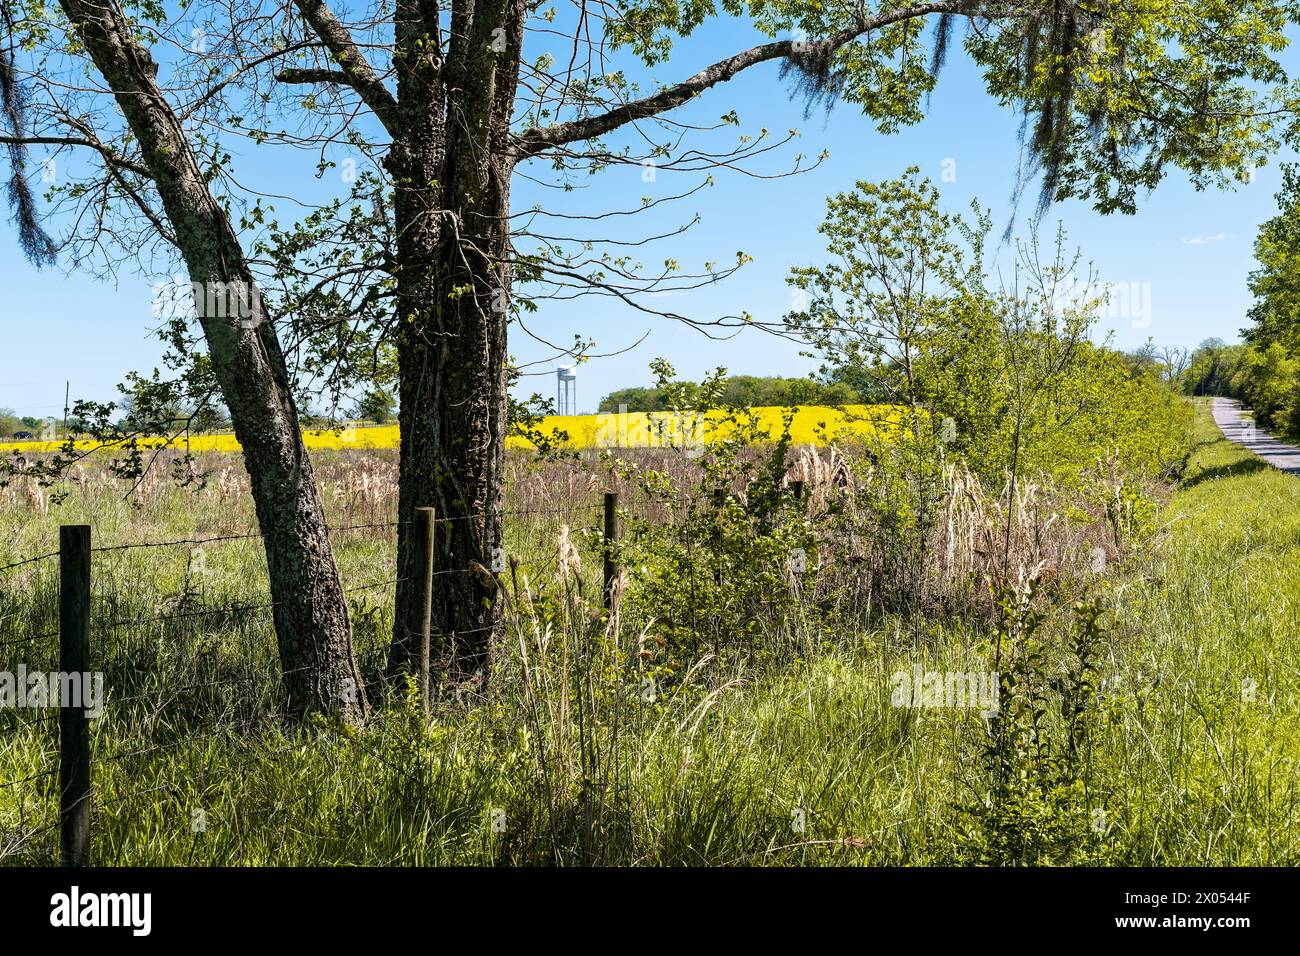 Early spring or summer landscape with a barbed wire fence and yellow wildflowers in a field in the distance in rural Alabama, USA. Stock Photo